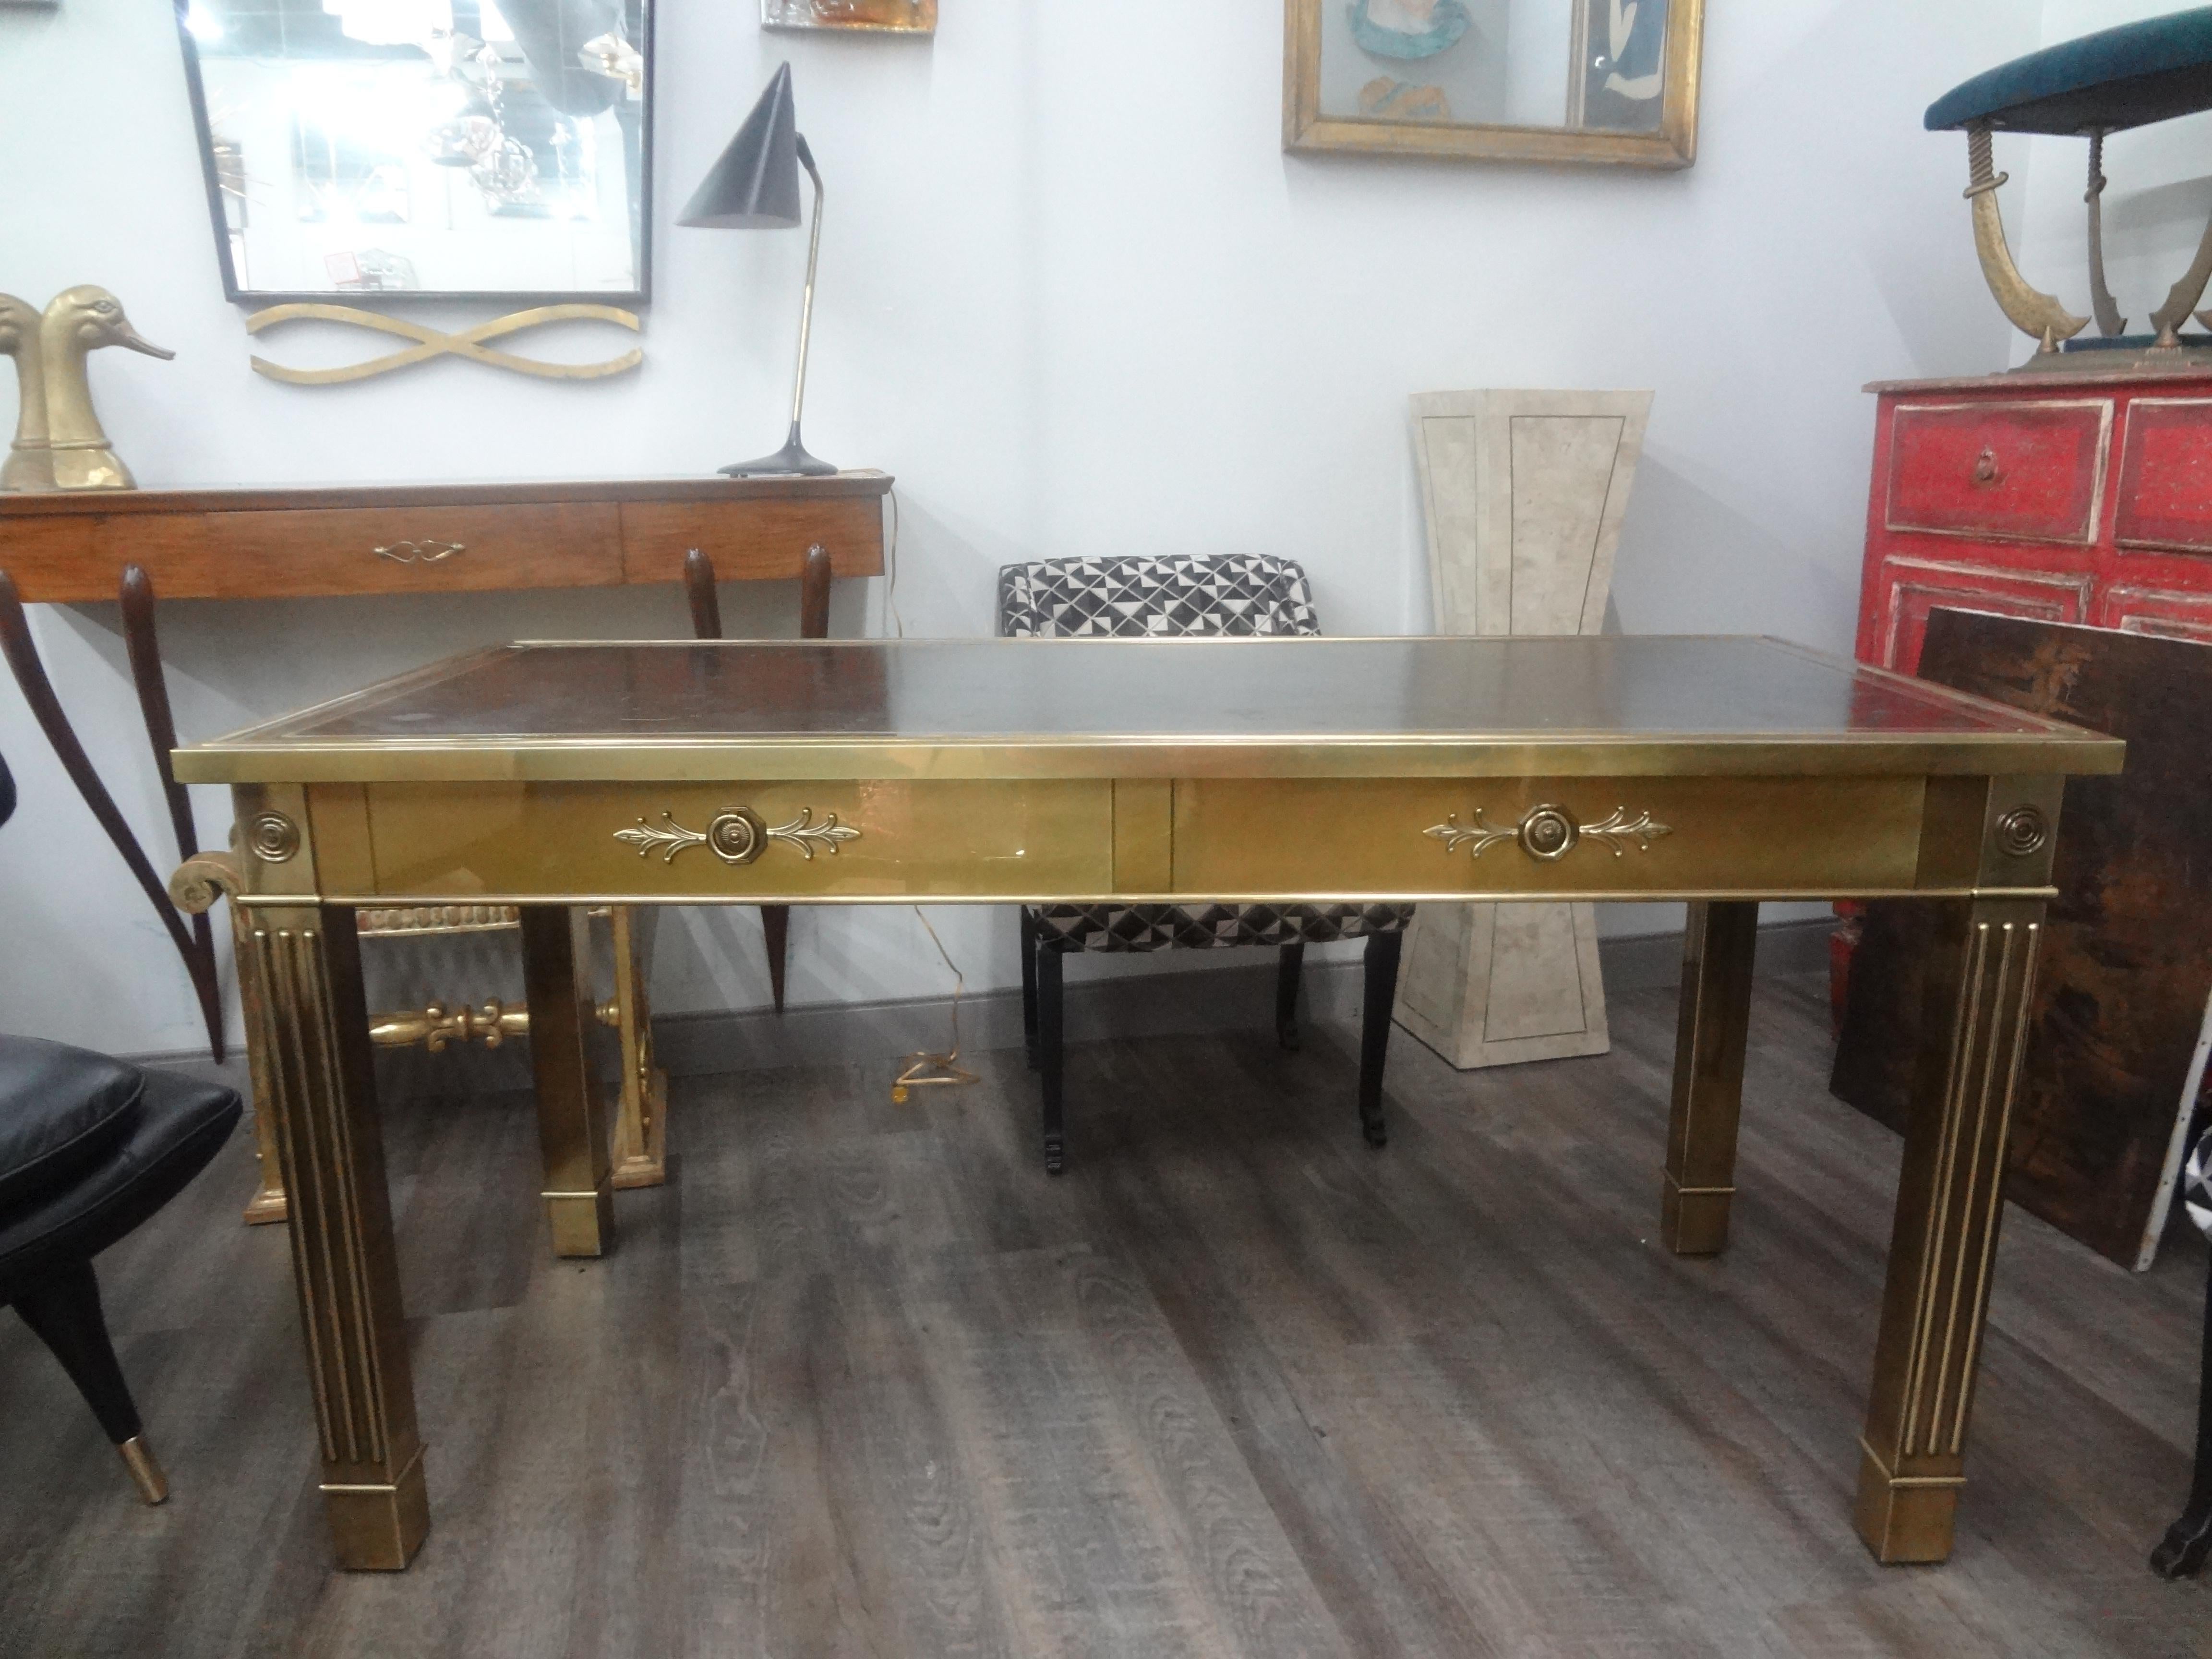 Iconic Mastercraft Brass Desk With Leather Top.
Stunning large mid century brass desk or writing table by Mastercraft.
This handsome desk has fluted legs with two drawers and a tooled black leather top.
Our classic Louis XVI style brass desk with